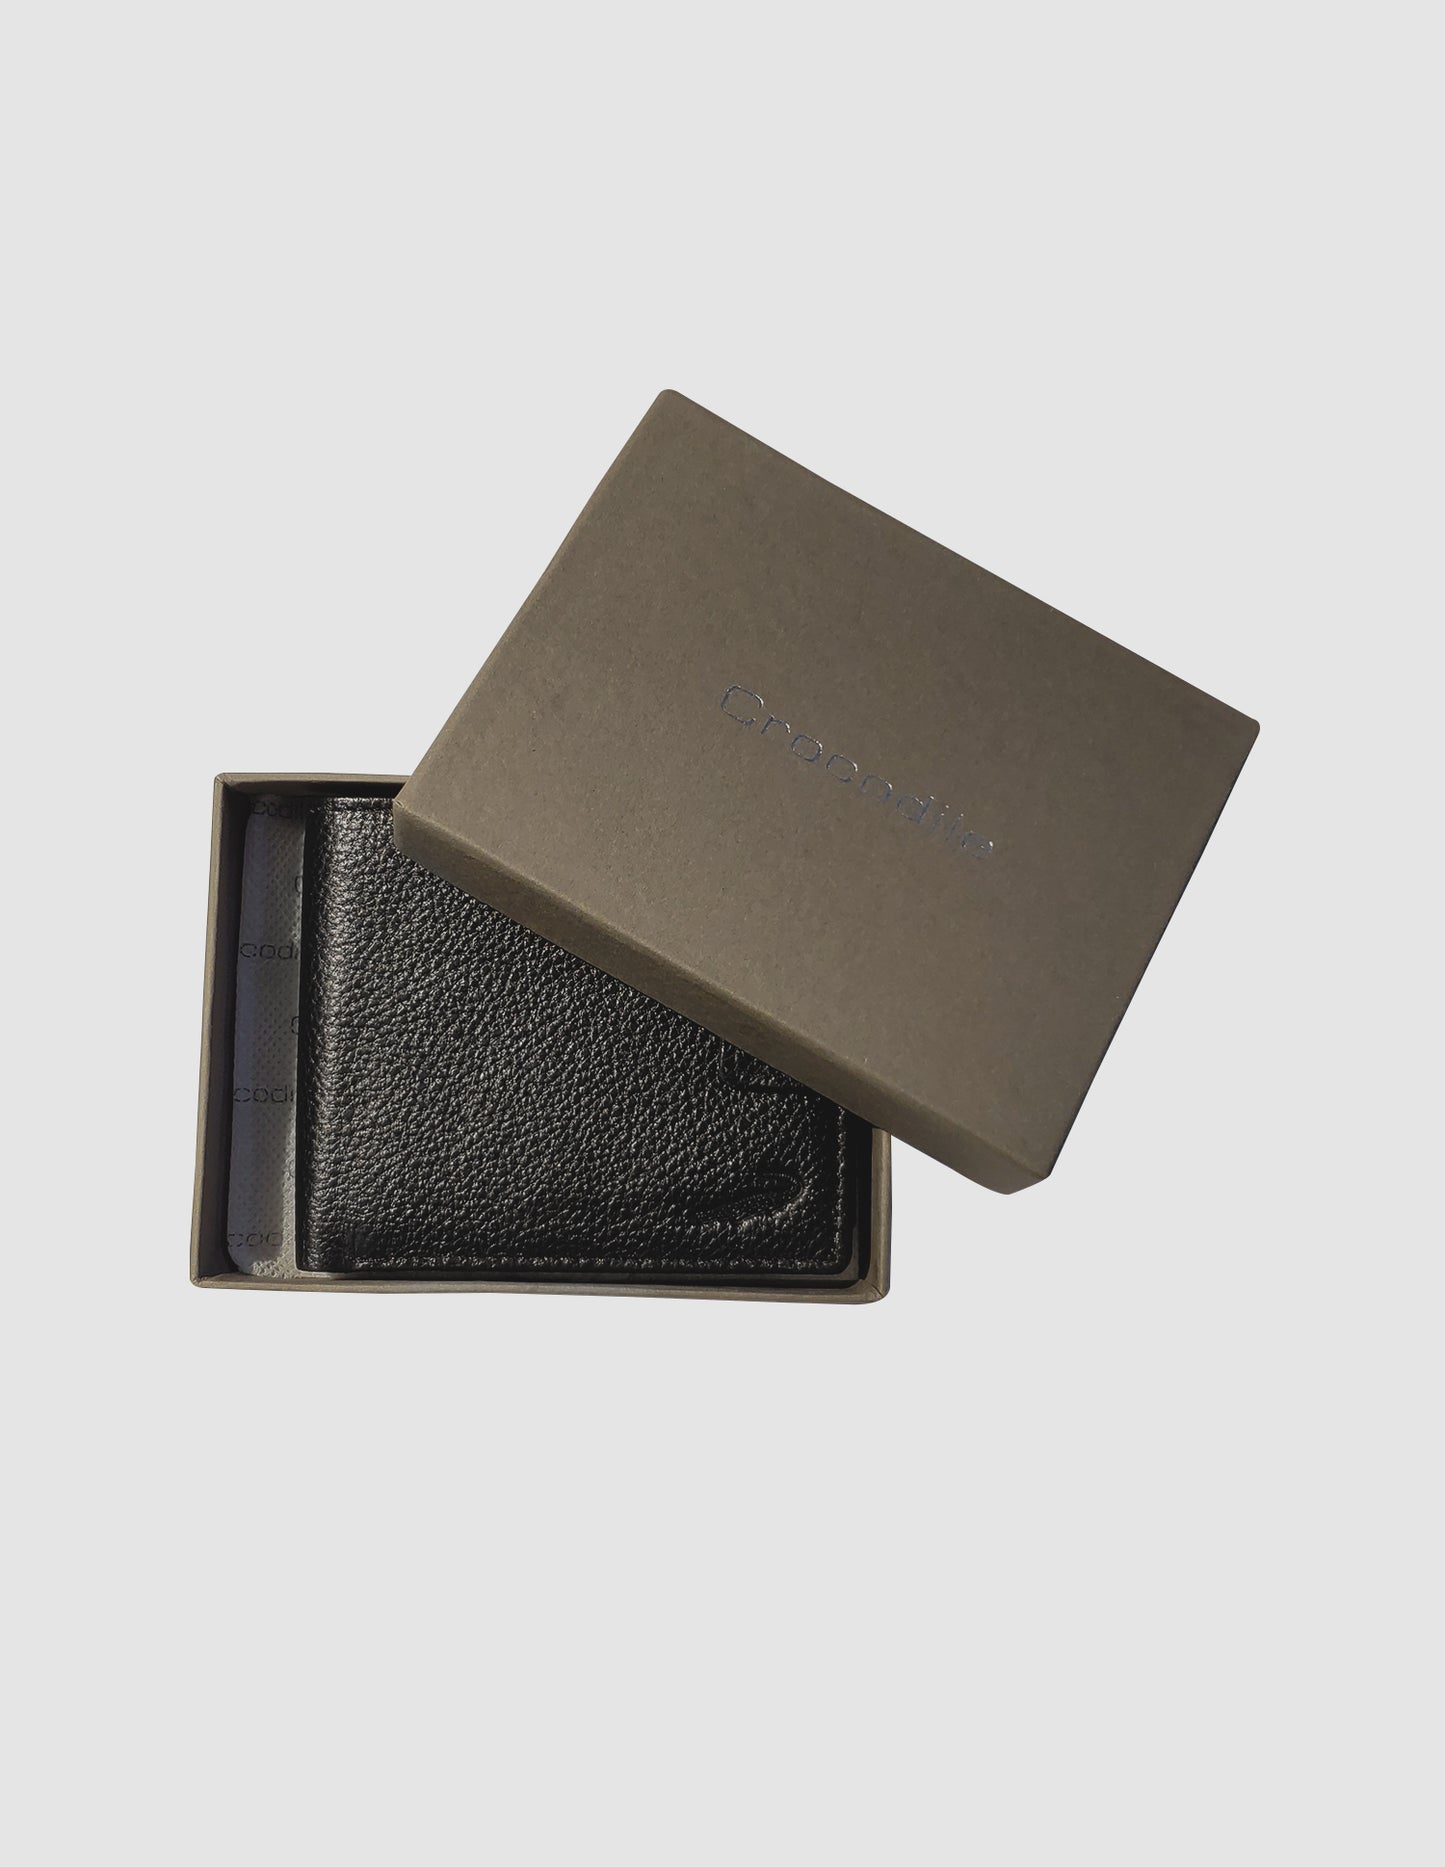 Black Leather Bifold Wallet with snap closure and ID flap